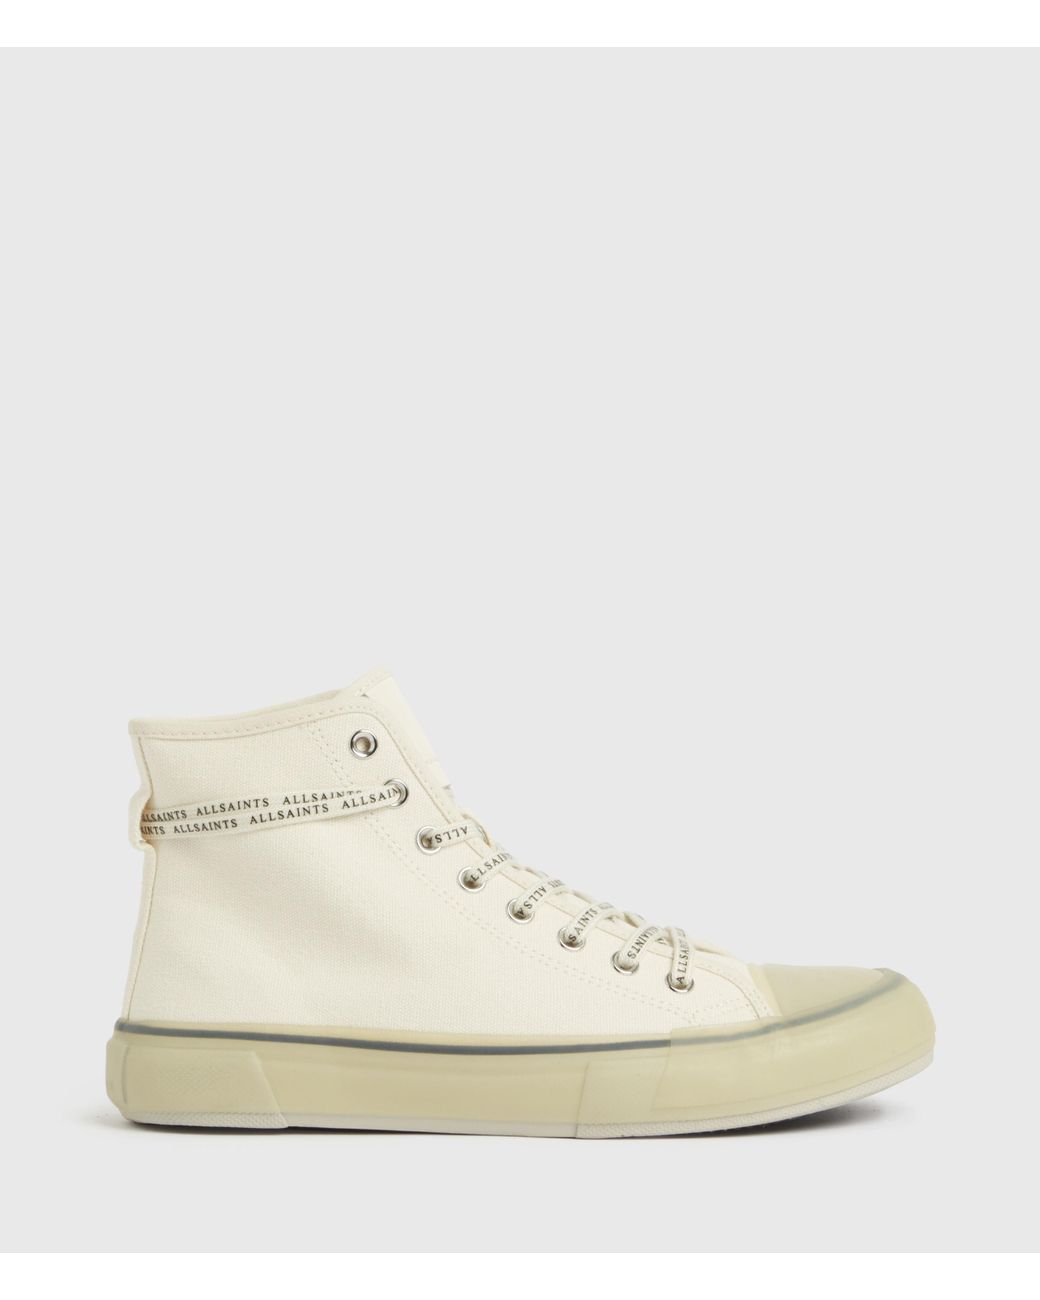 AllSaints Jaxal High Top Canvas Sneakers in White | Lyst